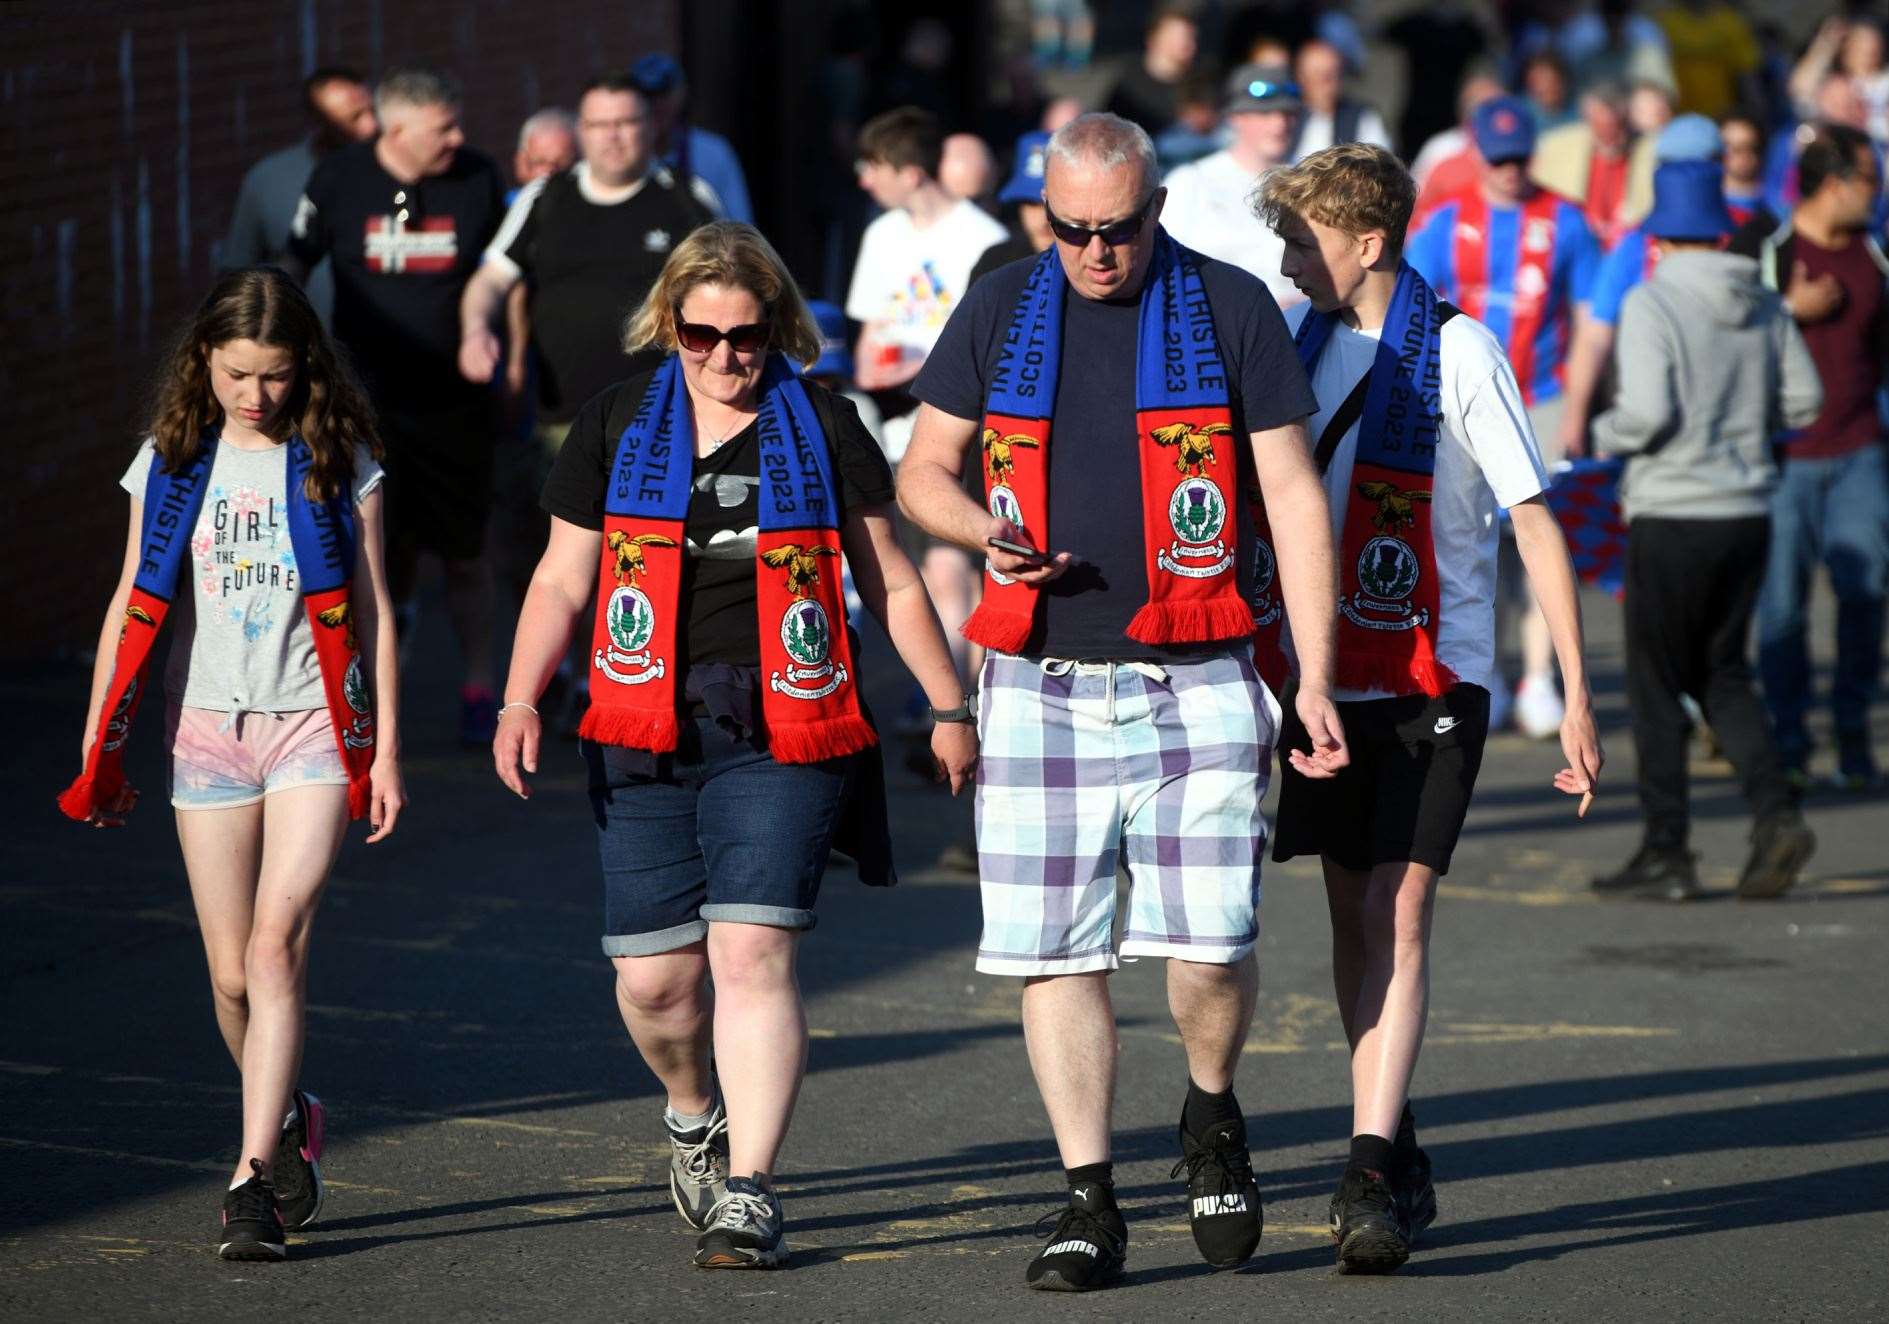 Caley Thistle fans leave the ground after applauding their side at the end of the game. Picture: James Mackenzie.